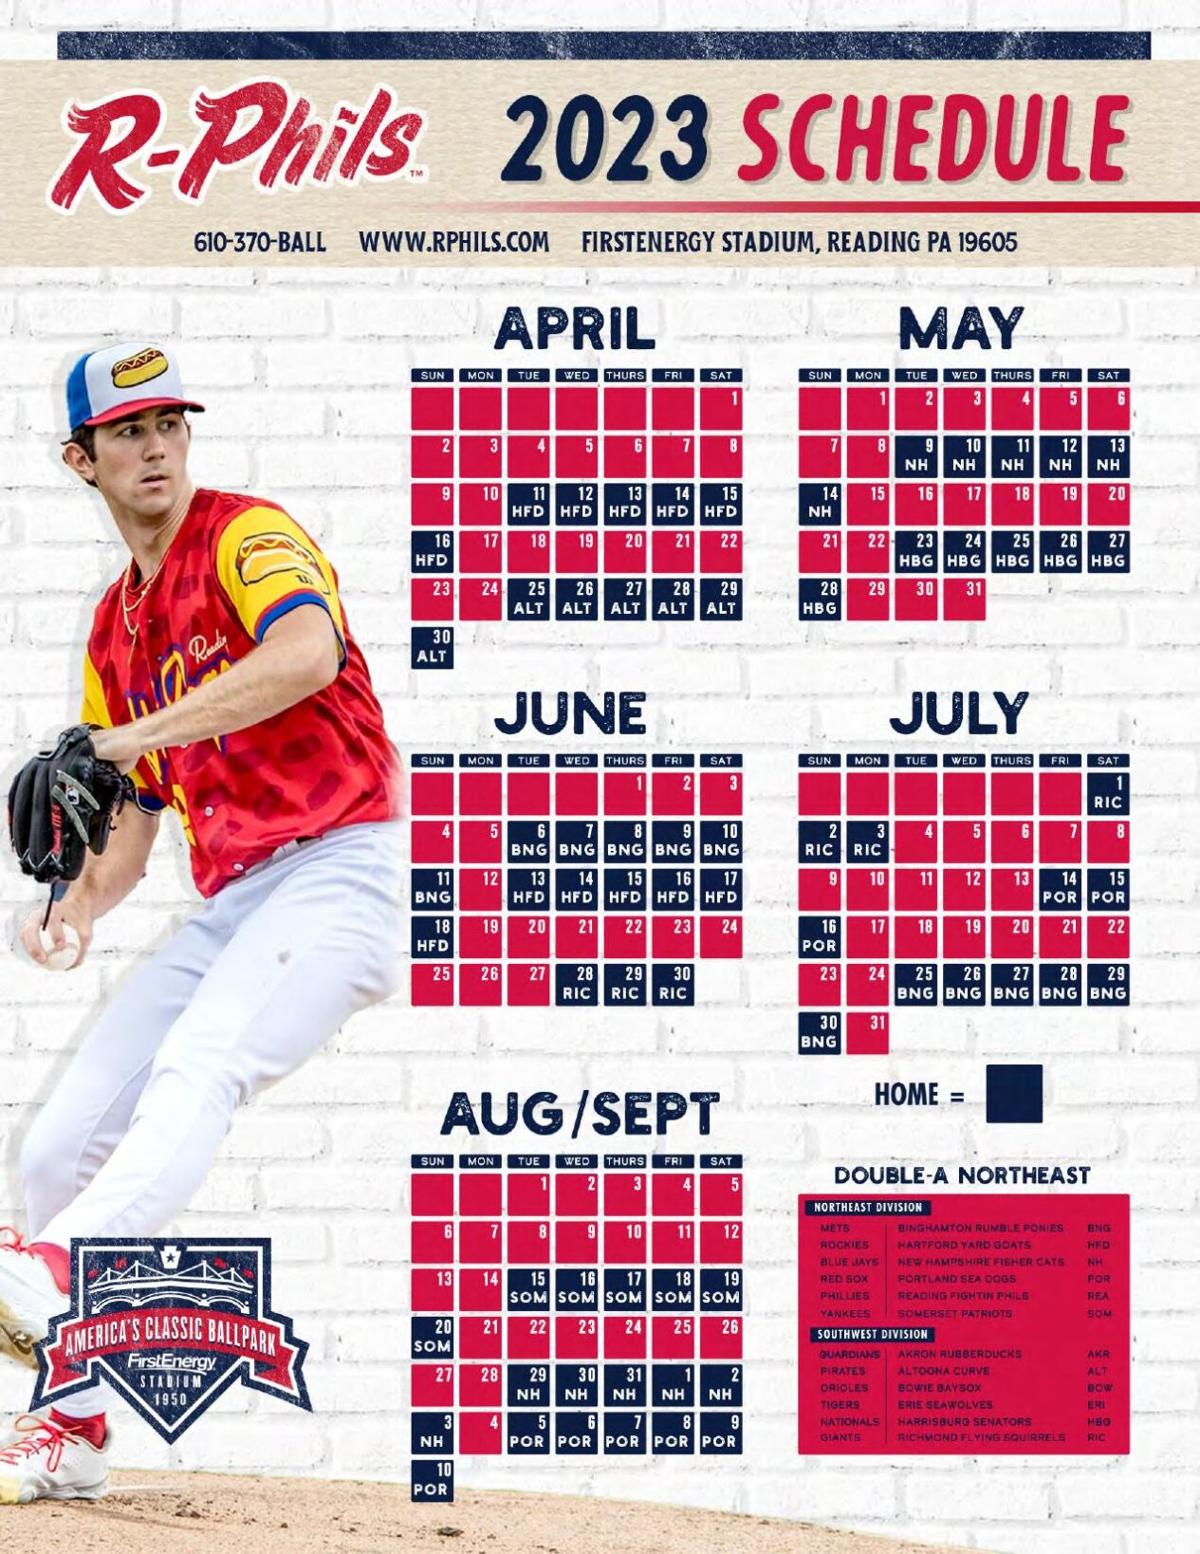 Reading Fightin Phils pull wraps off 2023 home schedule Berks